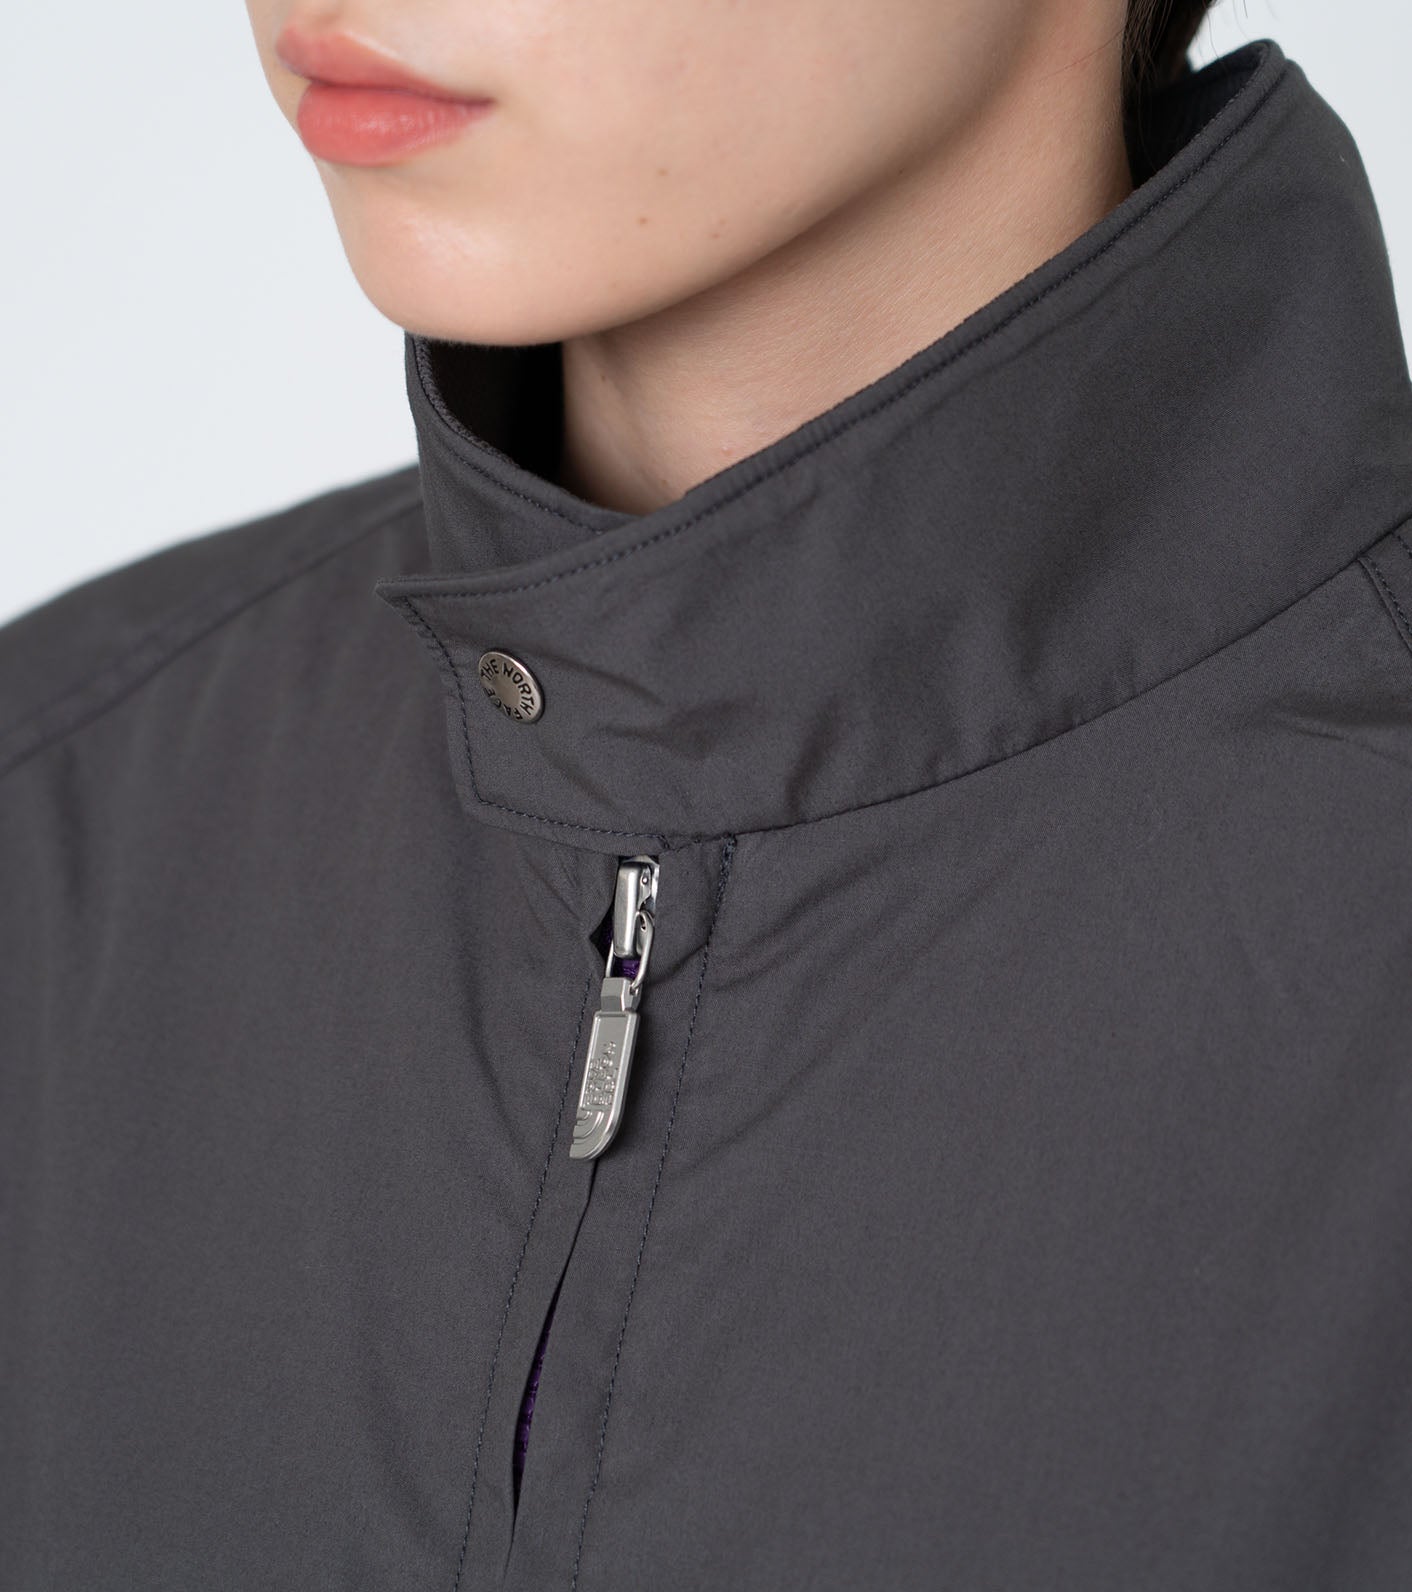 THE NORTH FACE PURPLE LABEL 65/35 Field Insulation Jacket